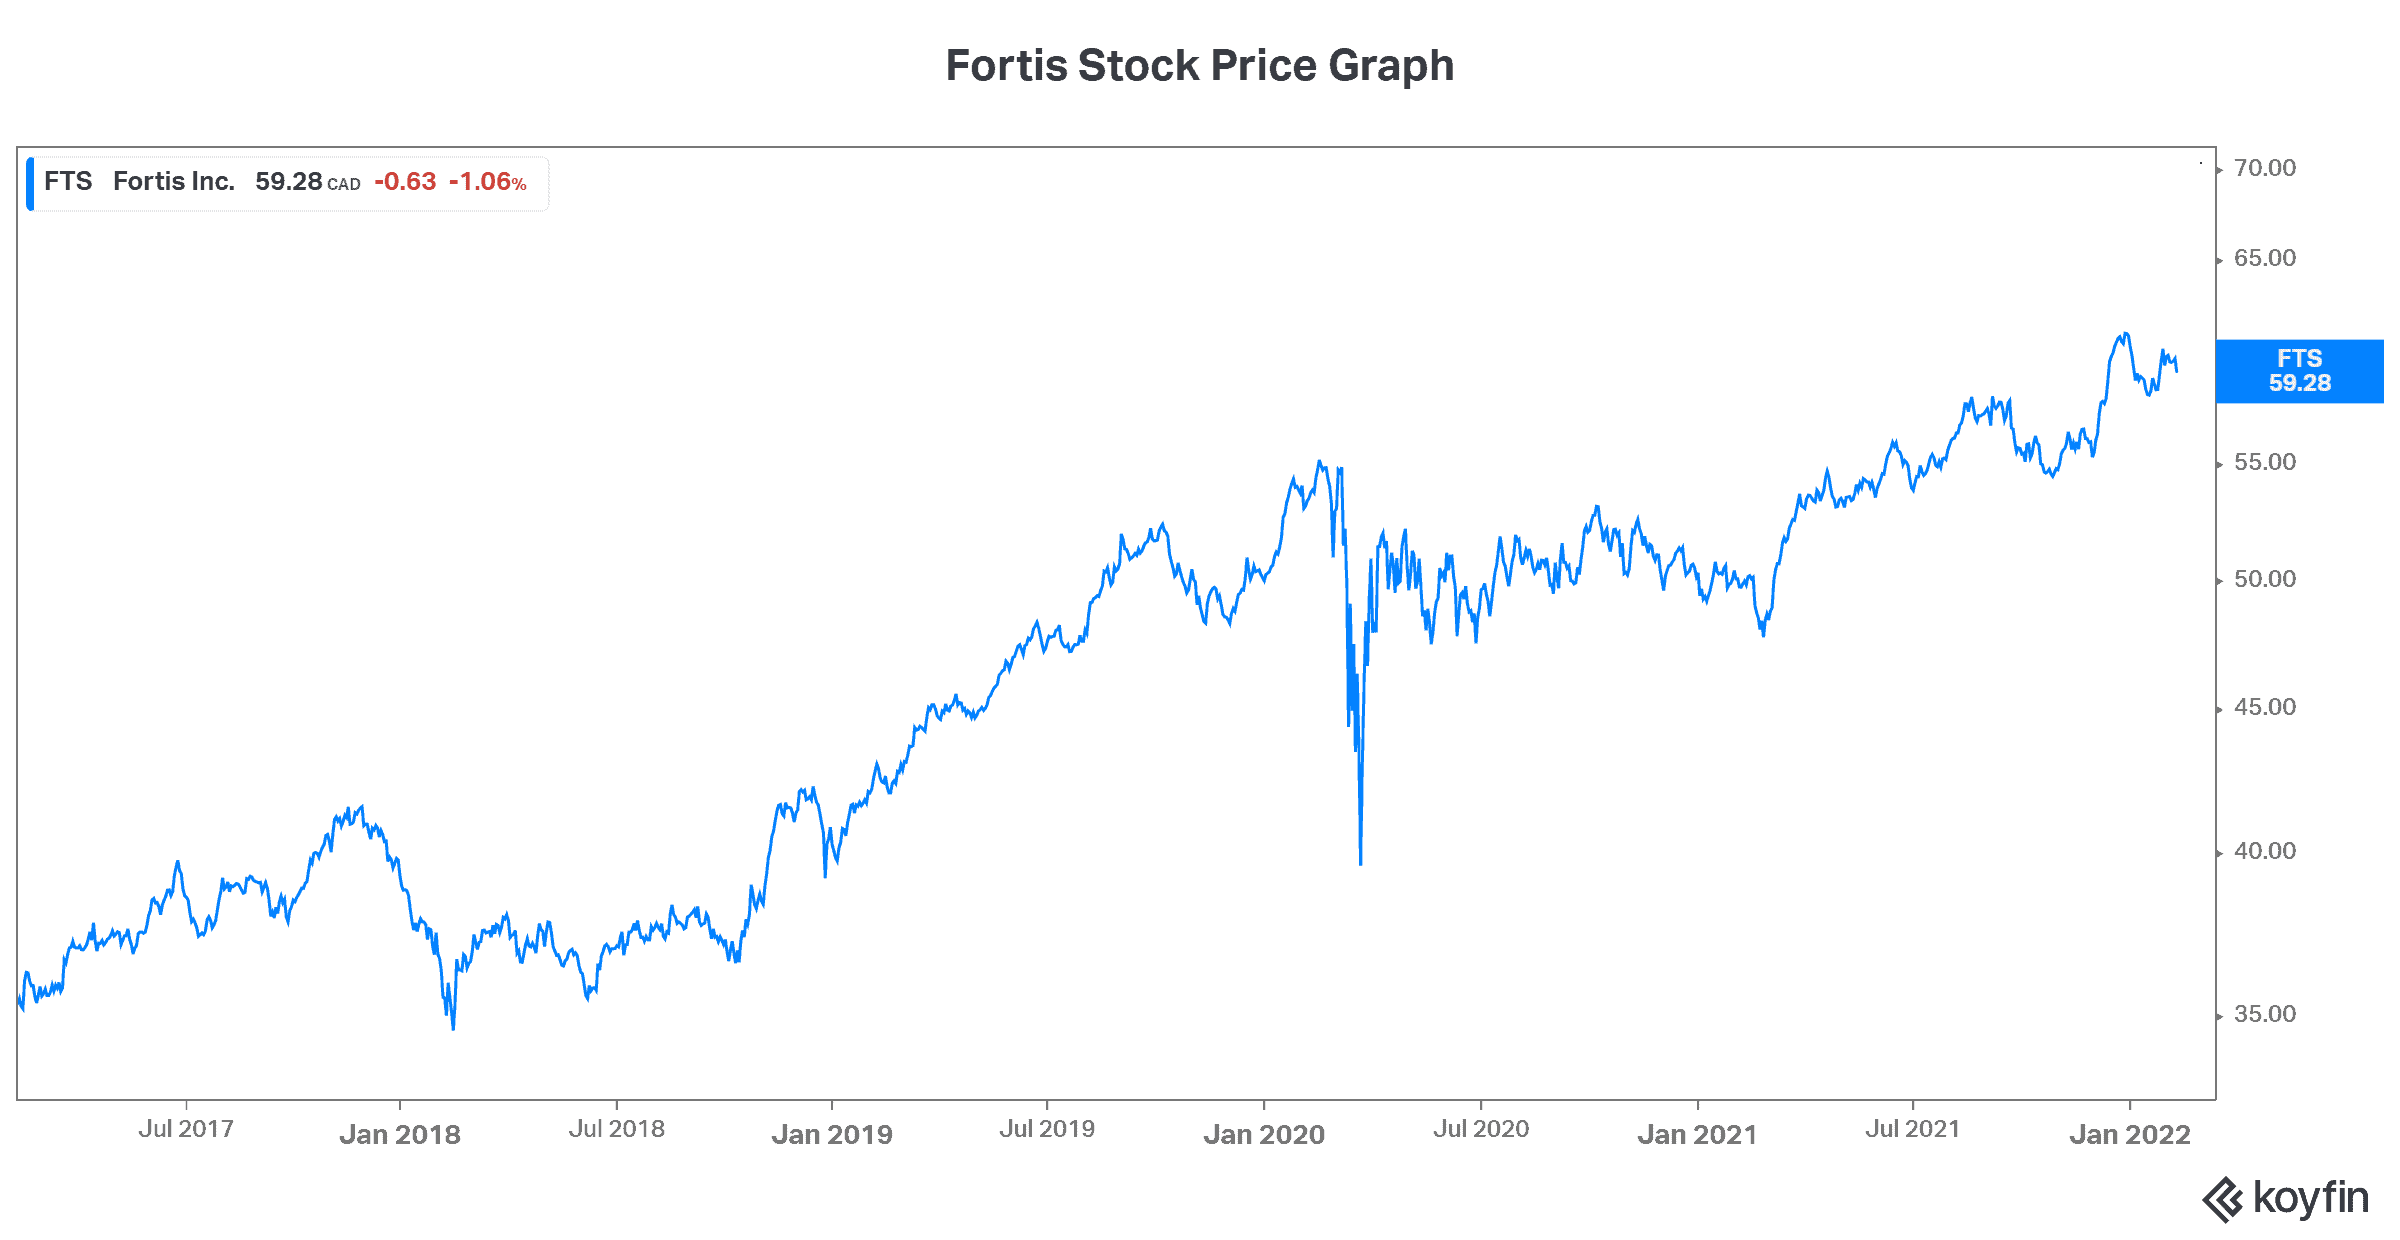 Fortis stock for RRSP